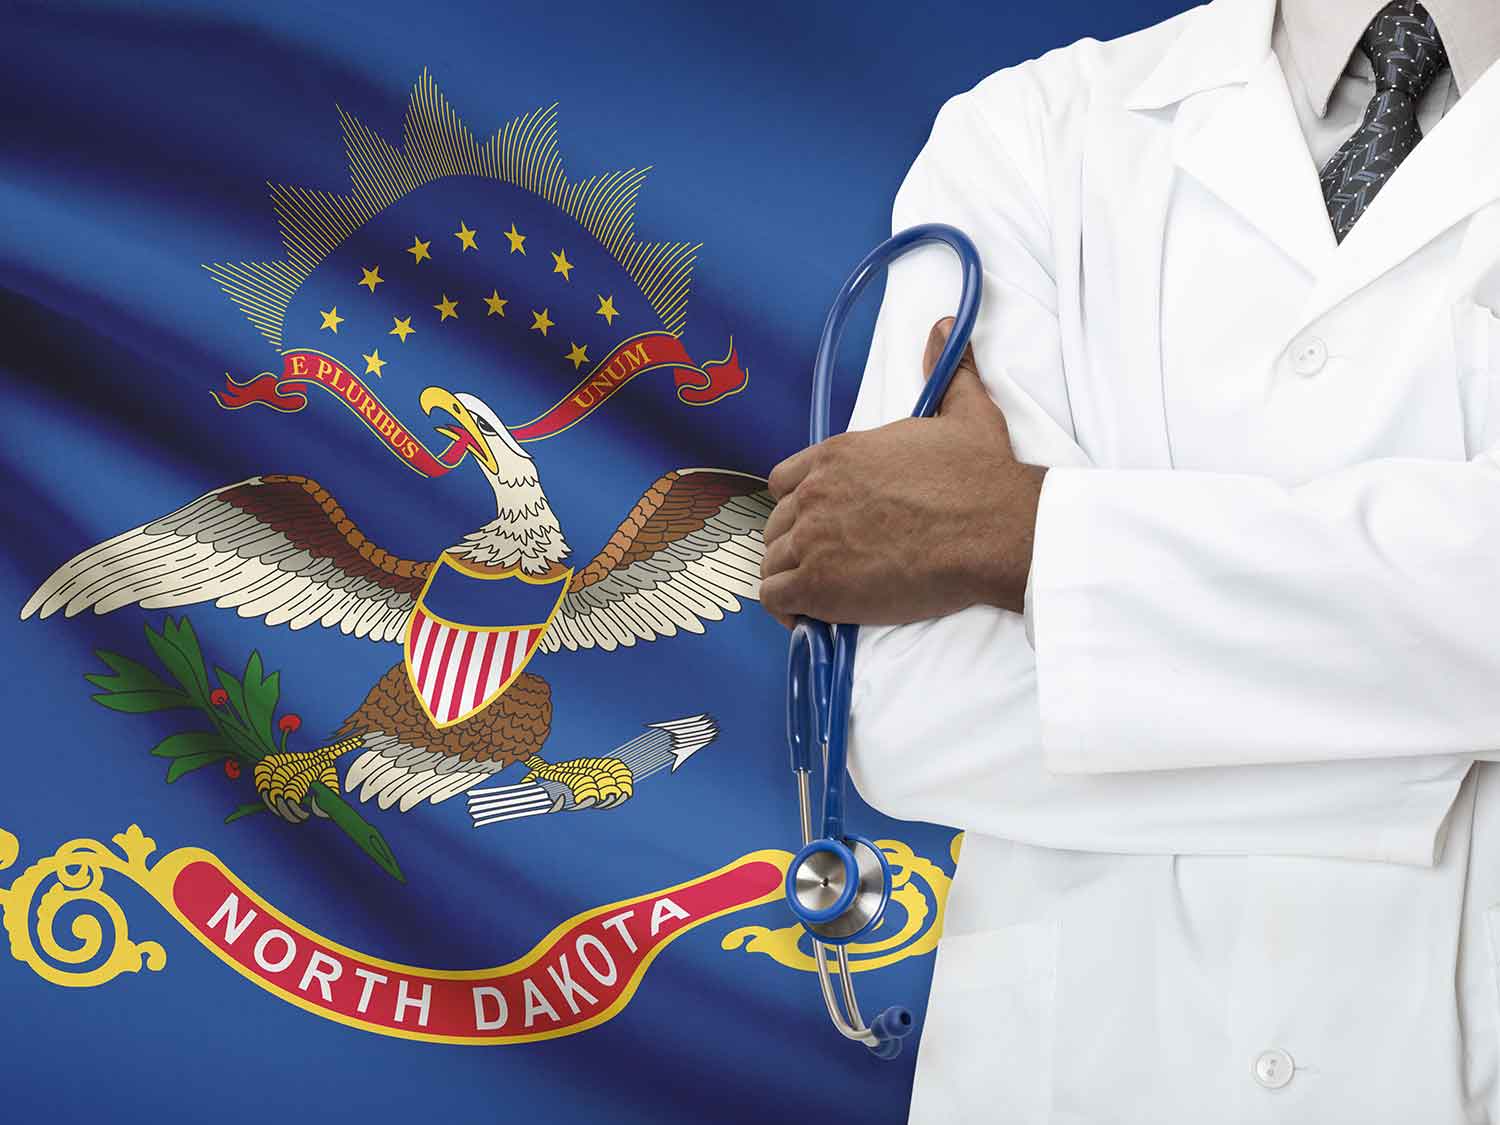 North Dakota Doctor With Medical Malpractice Insurance Standing In Front Of The State Flag